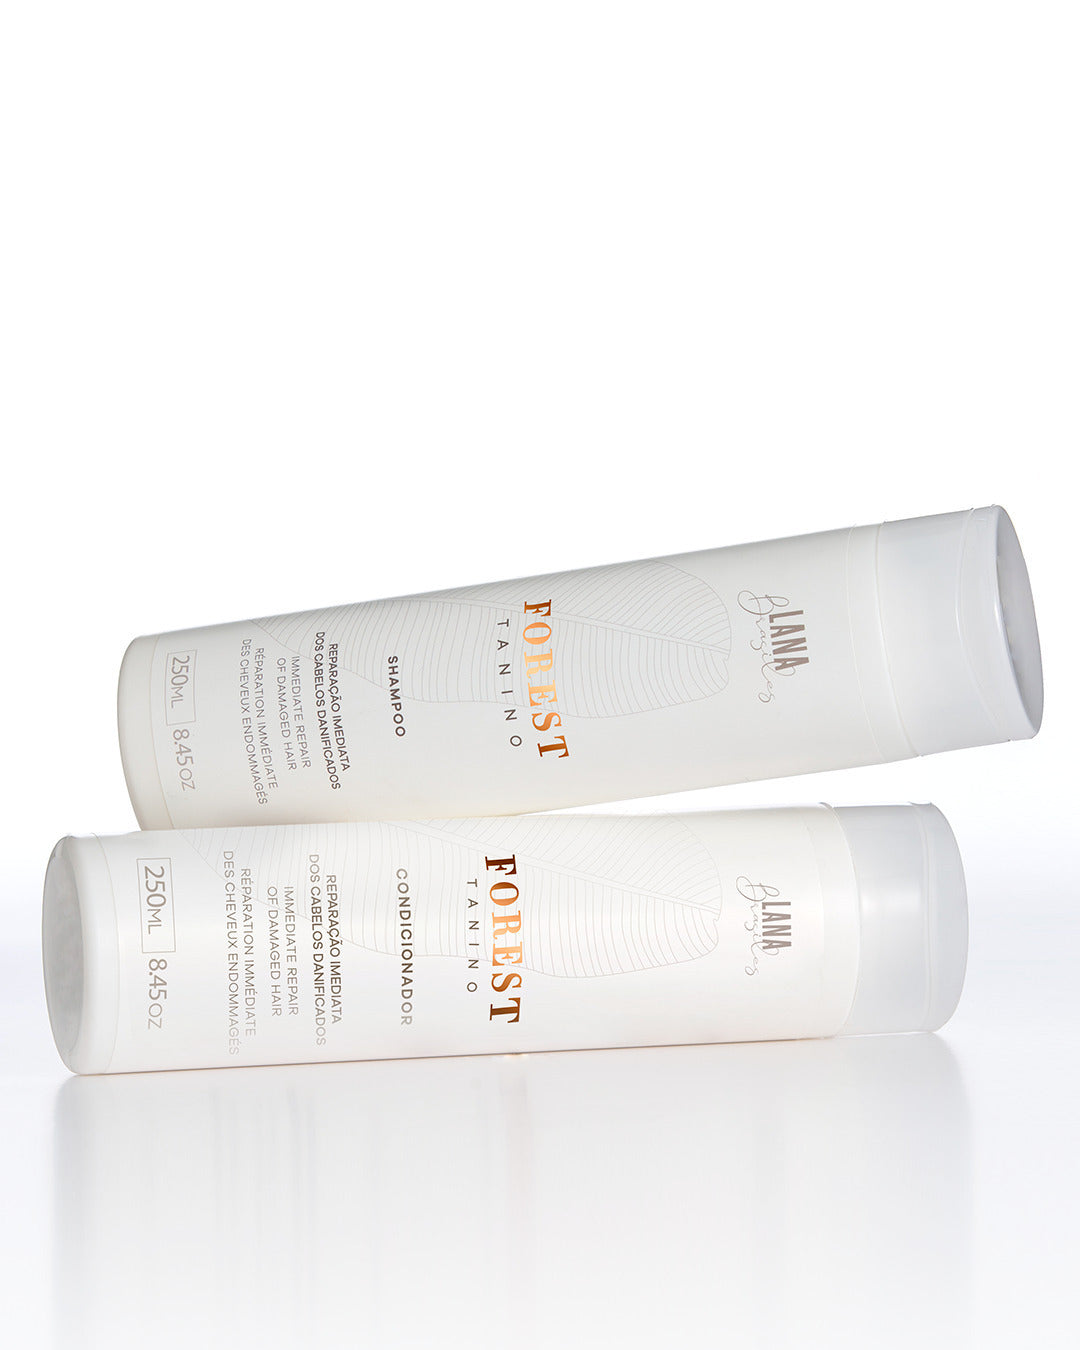 Lana Brasiles | Forest Tanino Shampoo And Conditioner Duo Hair Care| Immediate Repair of Highly Damaged Hair, Hair Vitality, and a Blend of Vitamins | (2x) 250 ml / 8.45 fl.oz. (Set of 2)